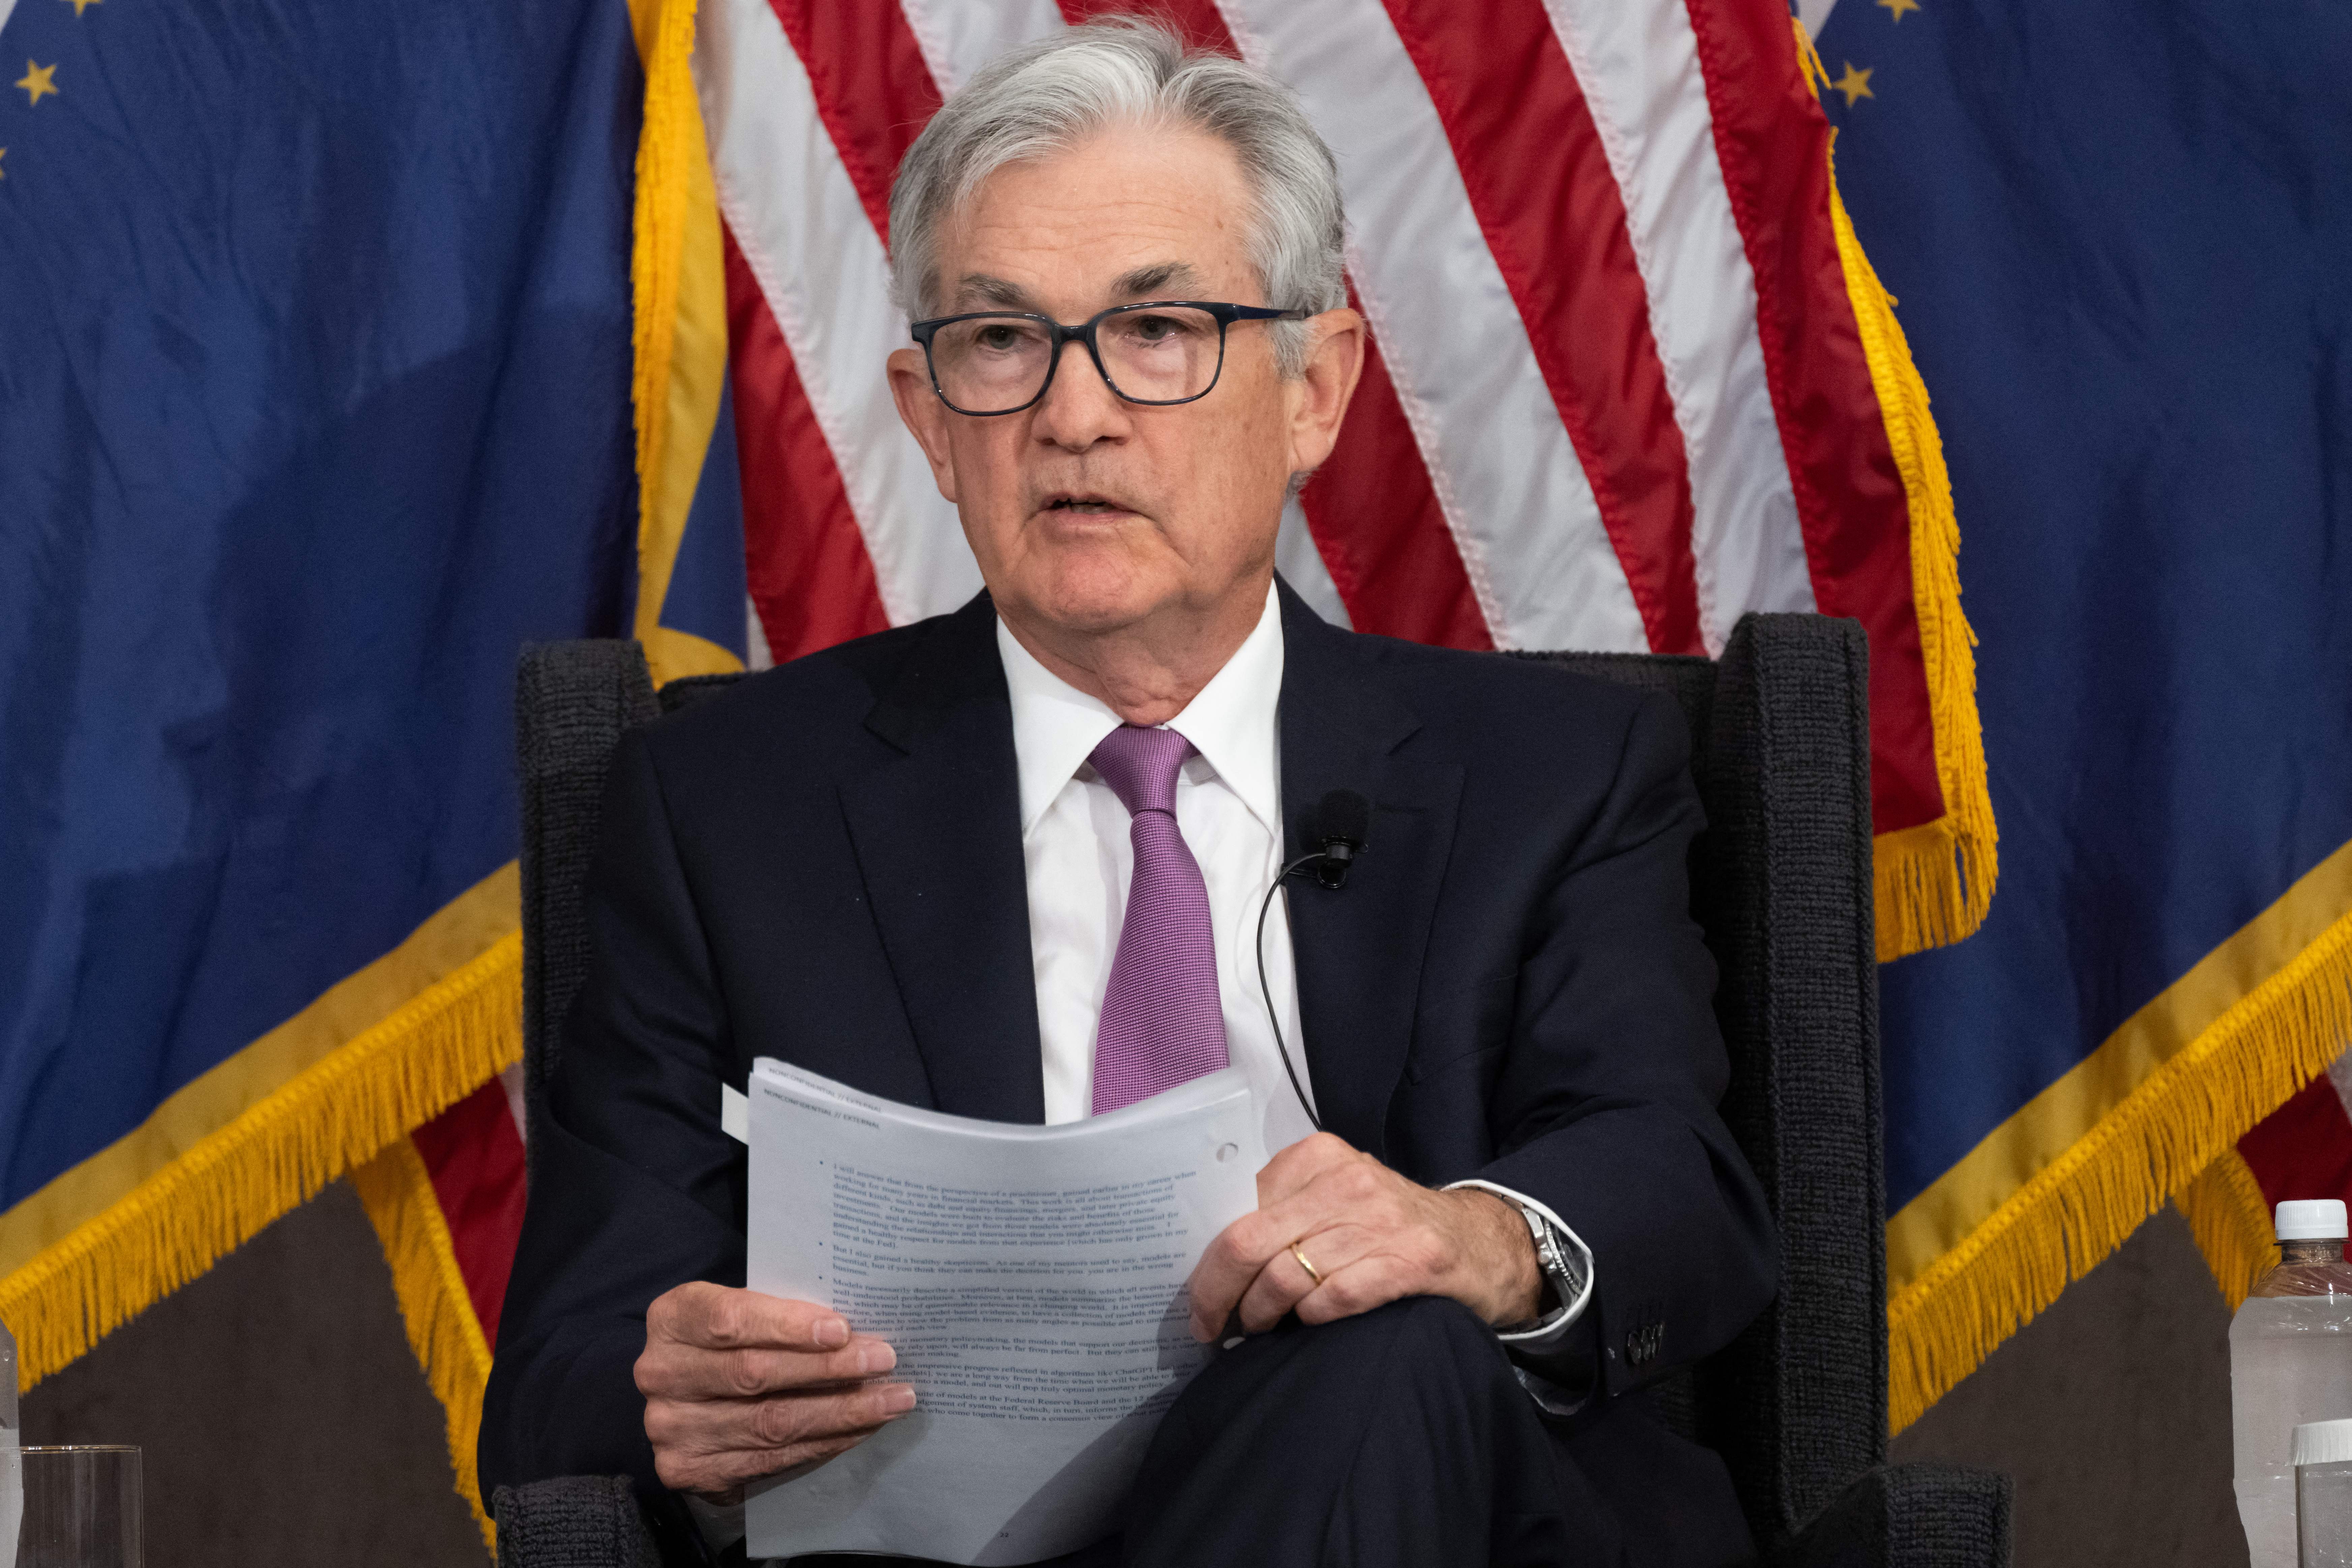 Fed Chairman Powell says interest rates may not have to rise as much as expected to rein in inflation